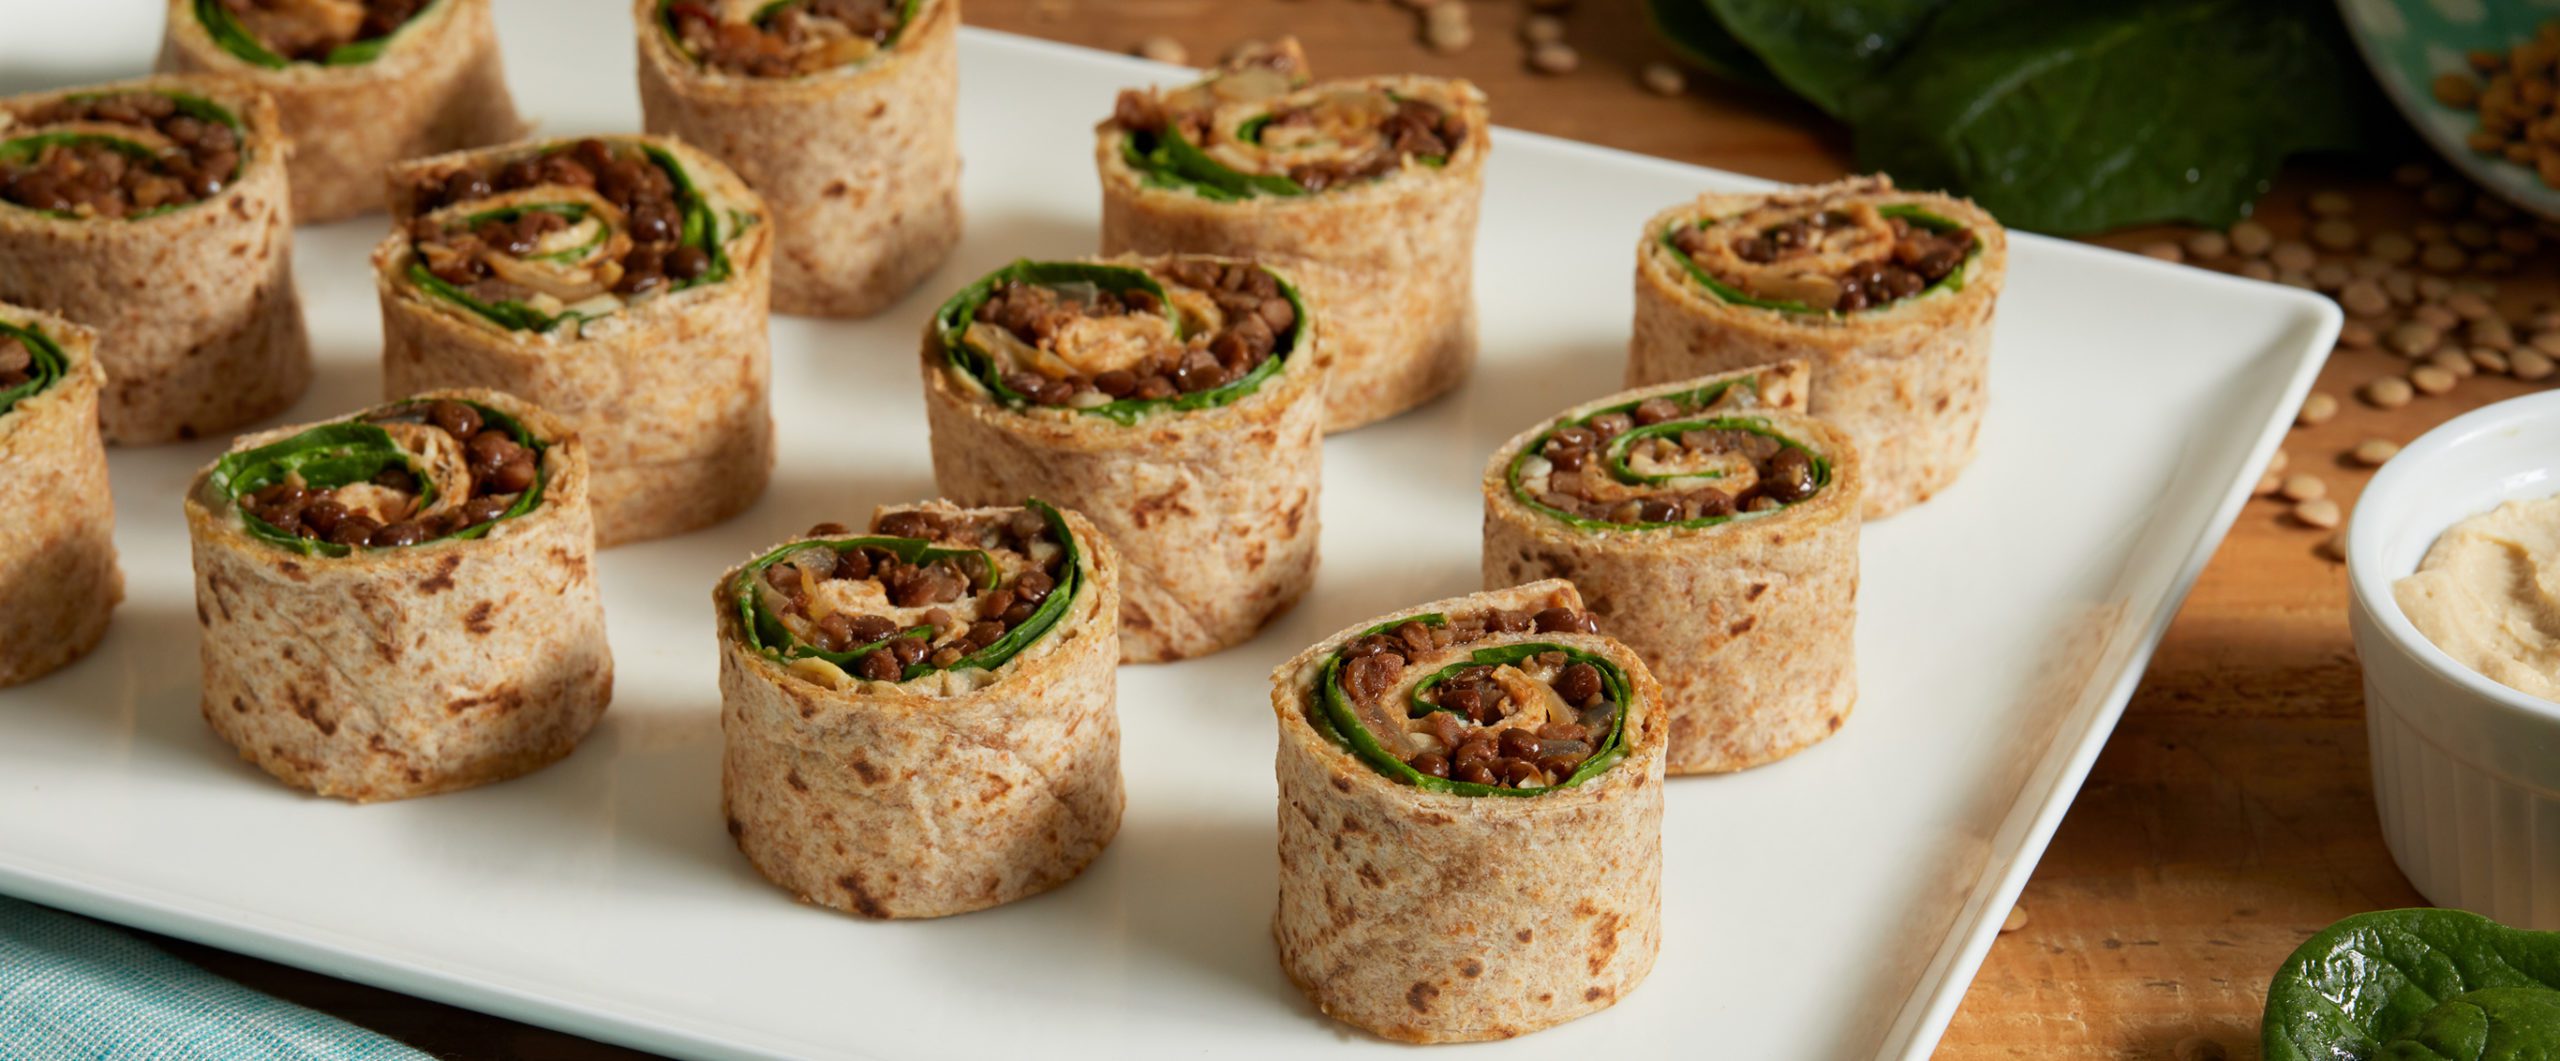 Lentil and Spinach Mini Wraps - Forks Over Knives